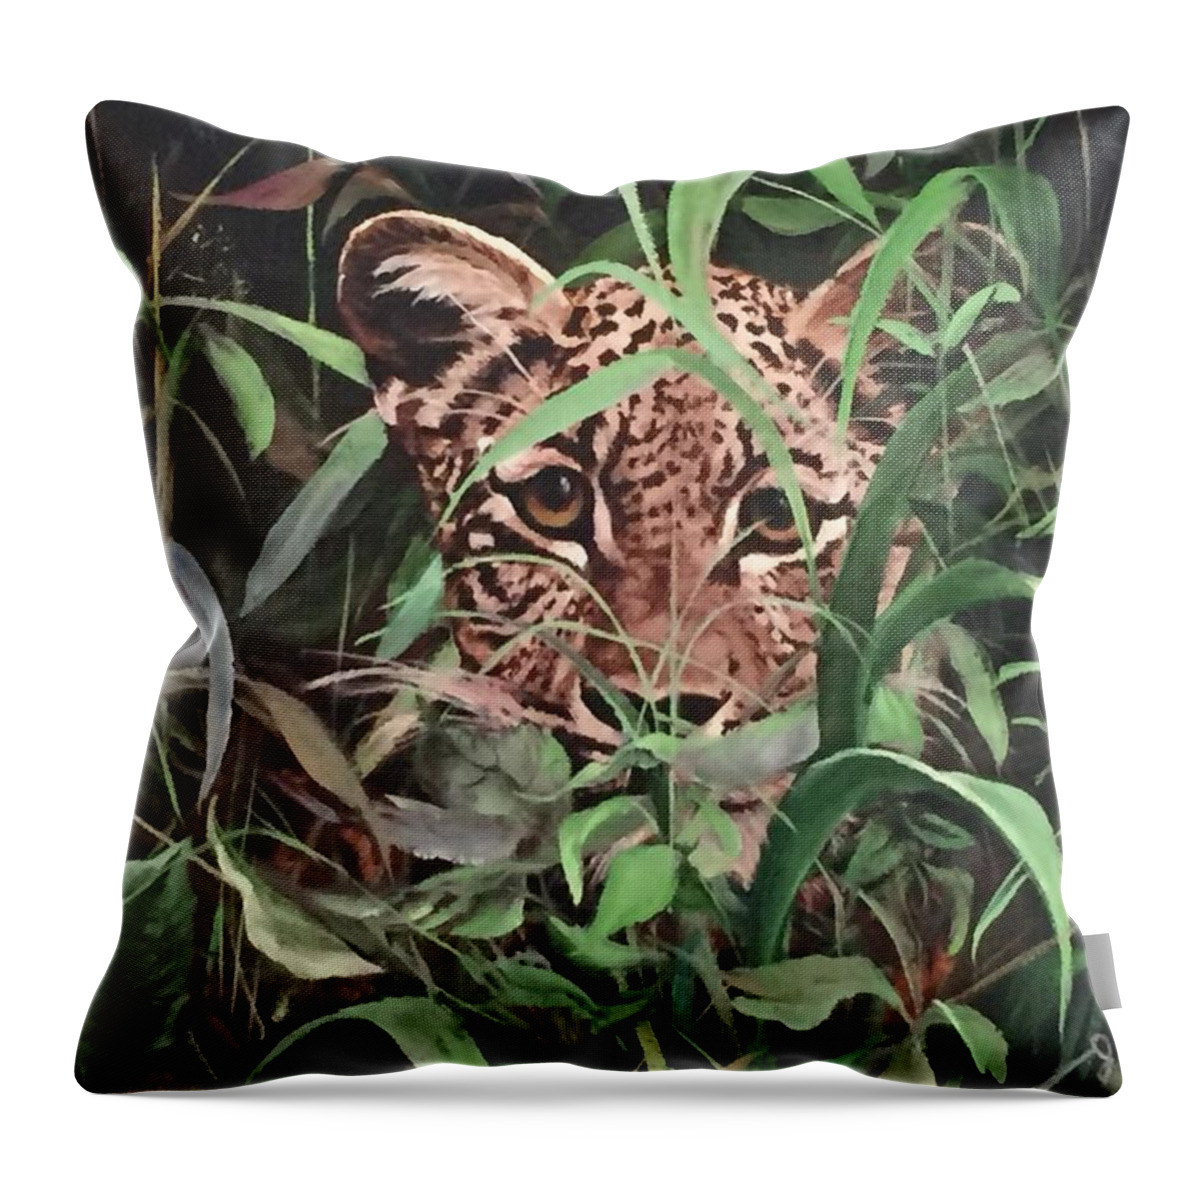 Leopard Throw Pillow featuring the painting Leopard In Jungle by Judy Rixom